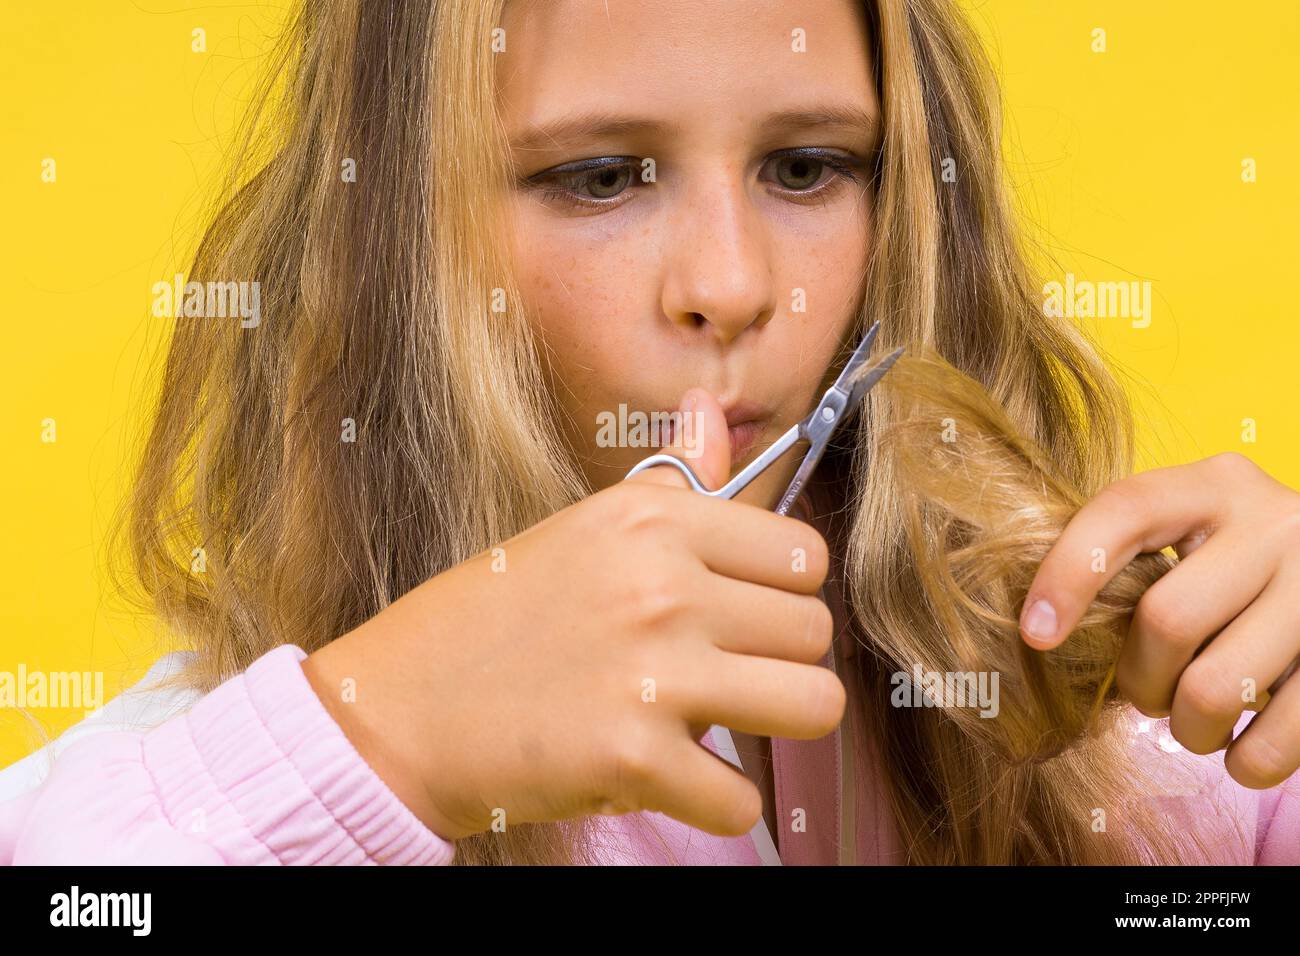 Child adorable girl hairdresser cutting long blonde hair with metallic scissors on yellow Stock Photo